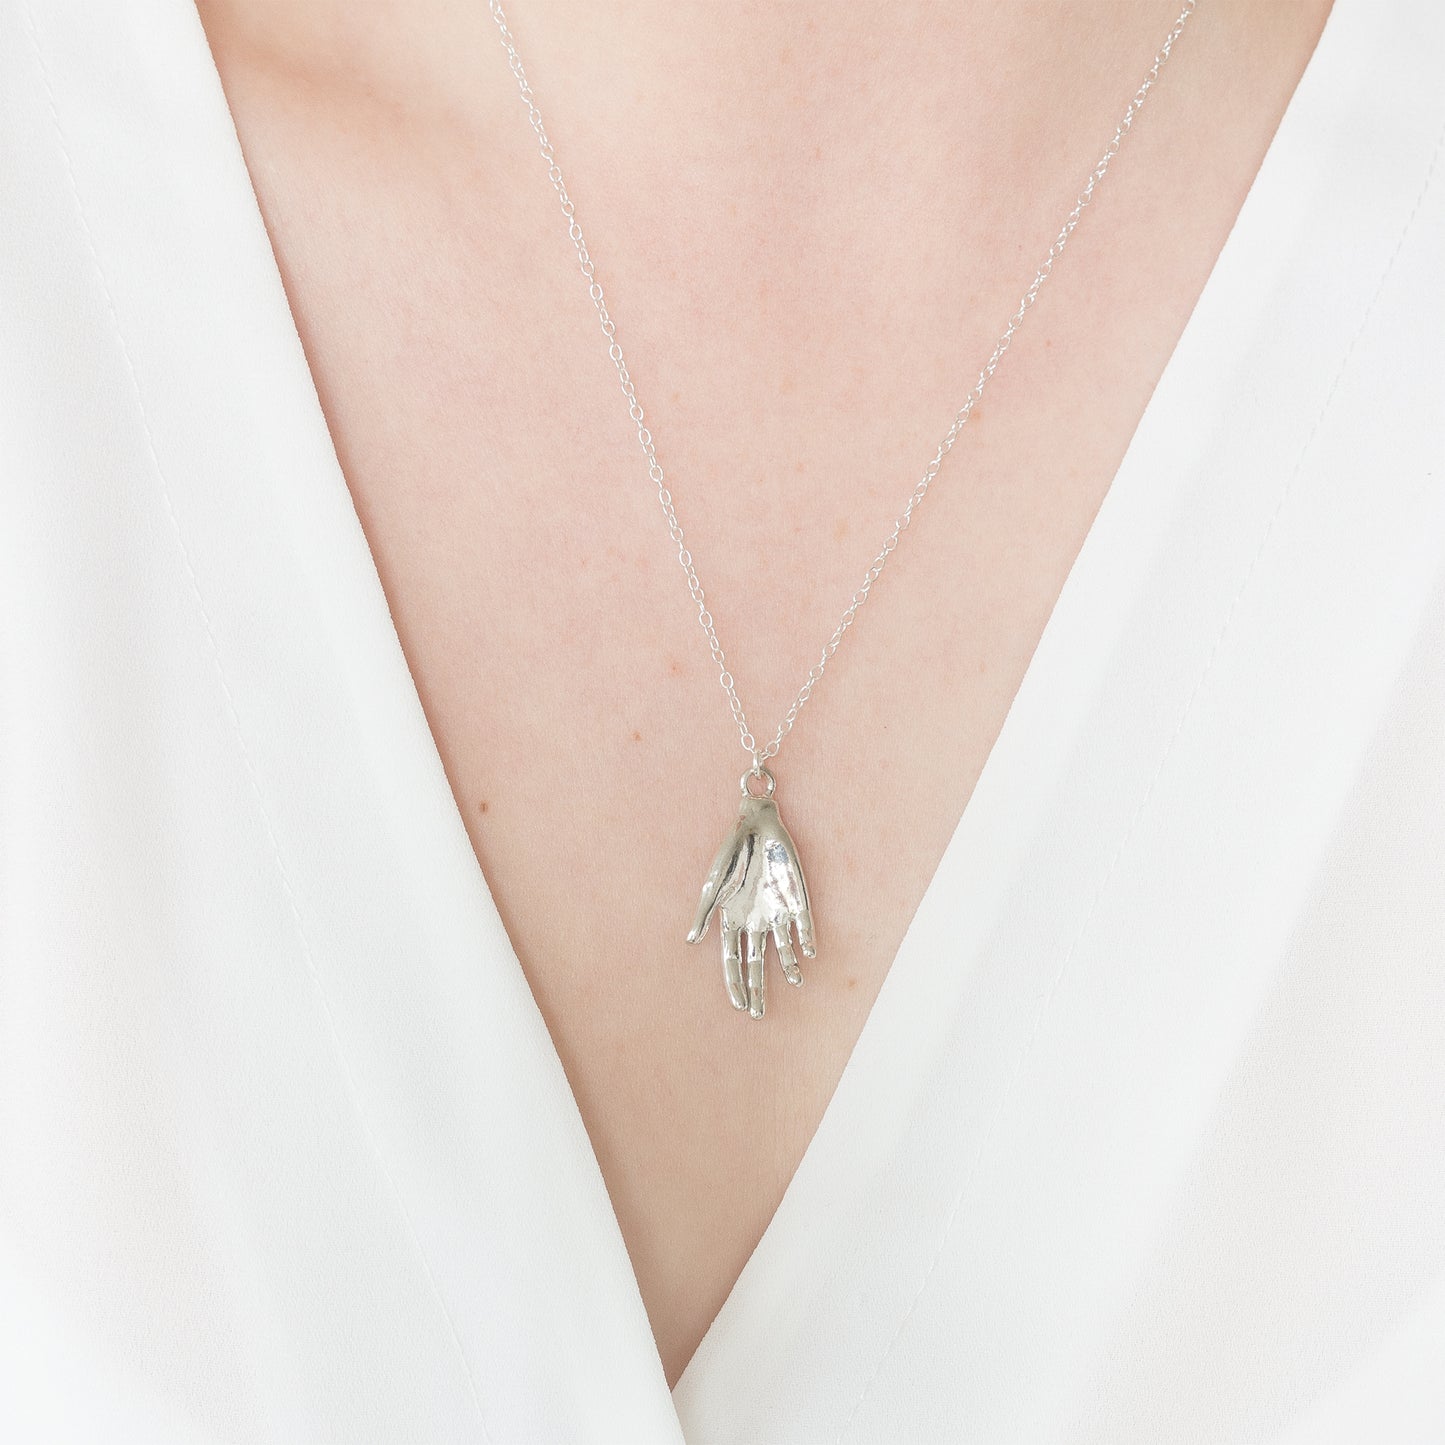 Minimal Silver Protective Hand Necklace